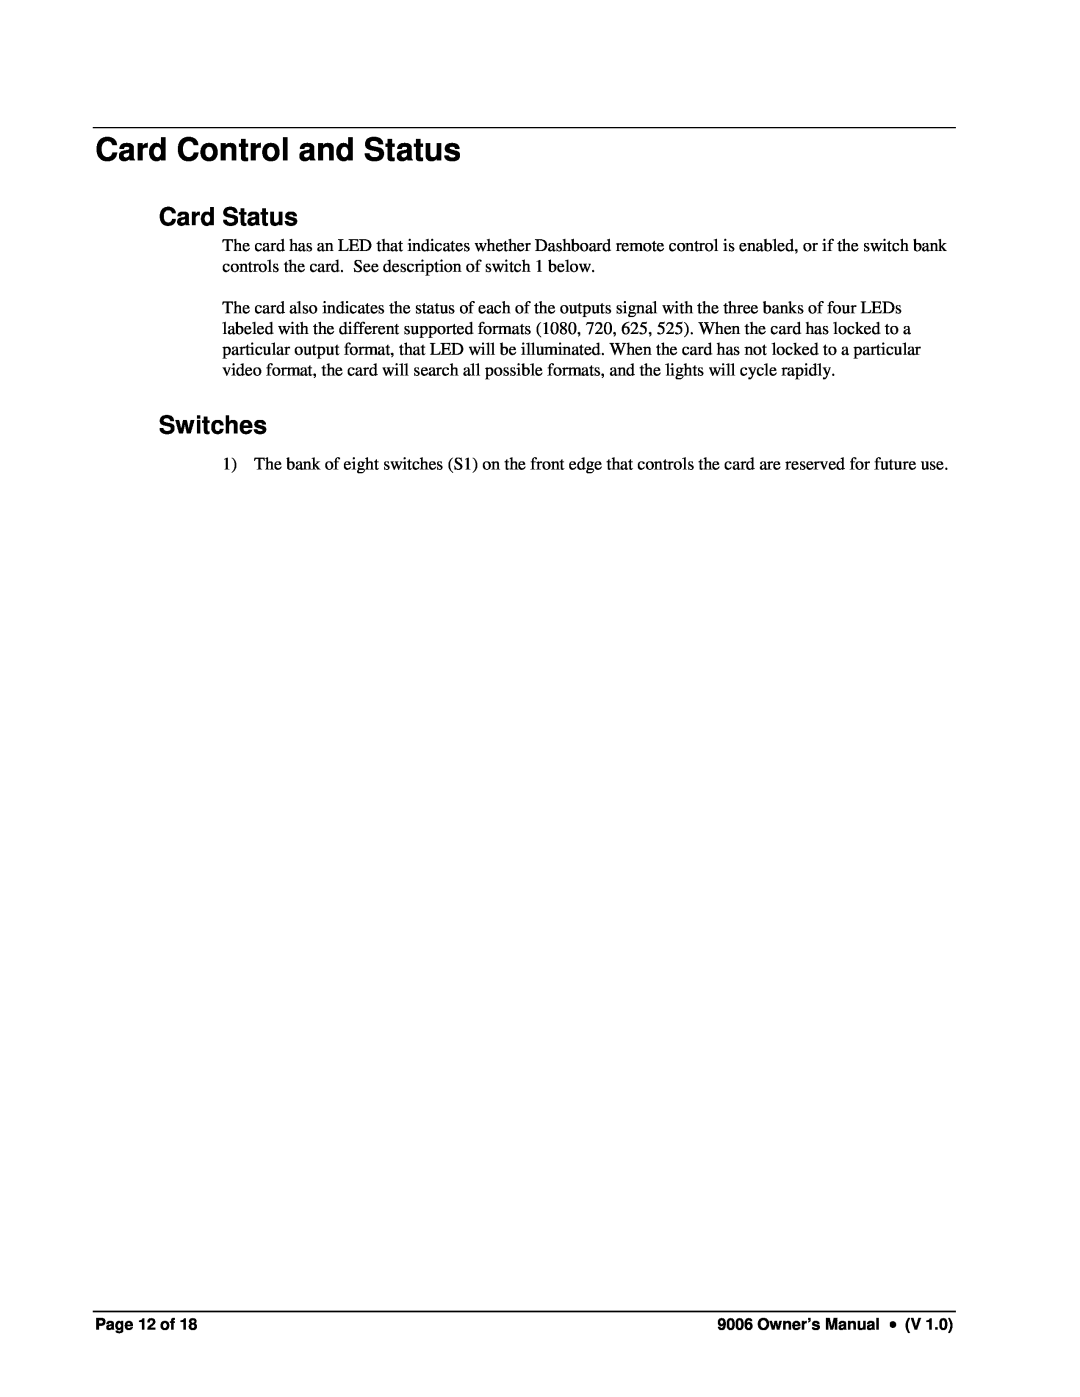 Cobalt Networks 9006 owner manual Card Control and Status, Card Status, Switches 